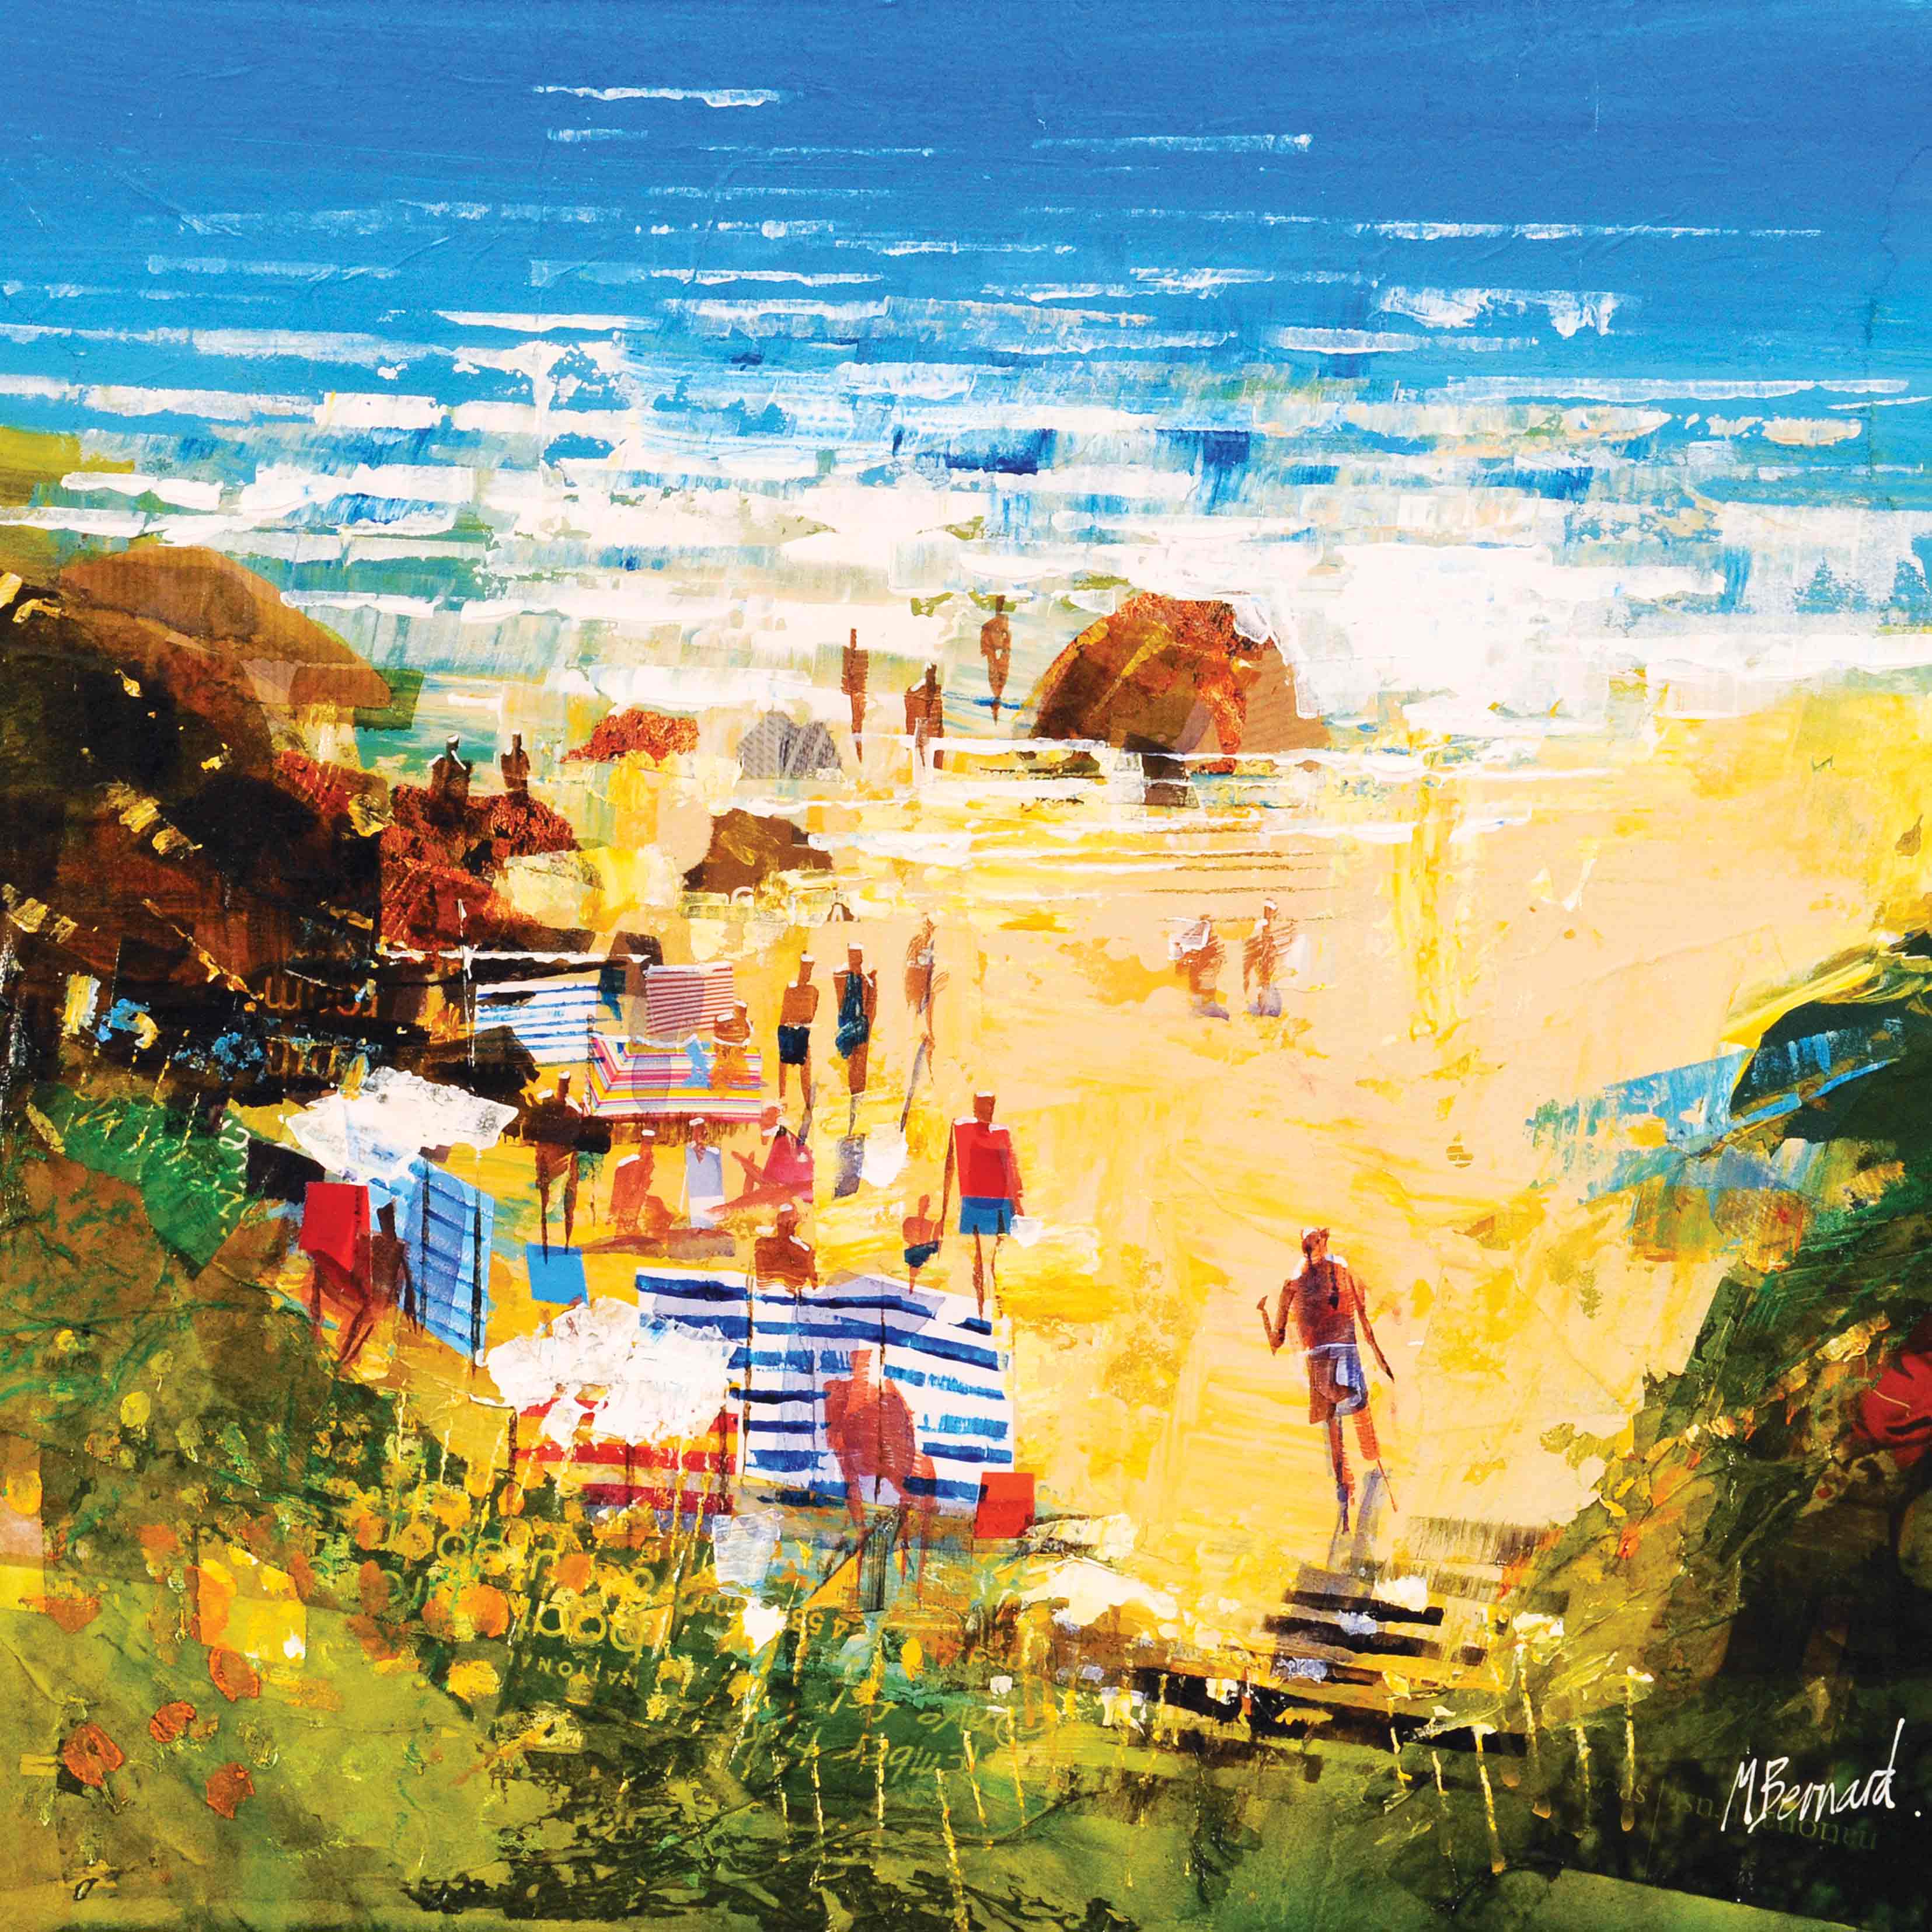 Art Greeting Card by Mike Bernard, Late Summer Swimmers, Watercolour, Swimmers on the beach